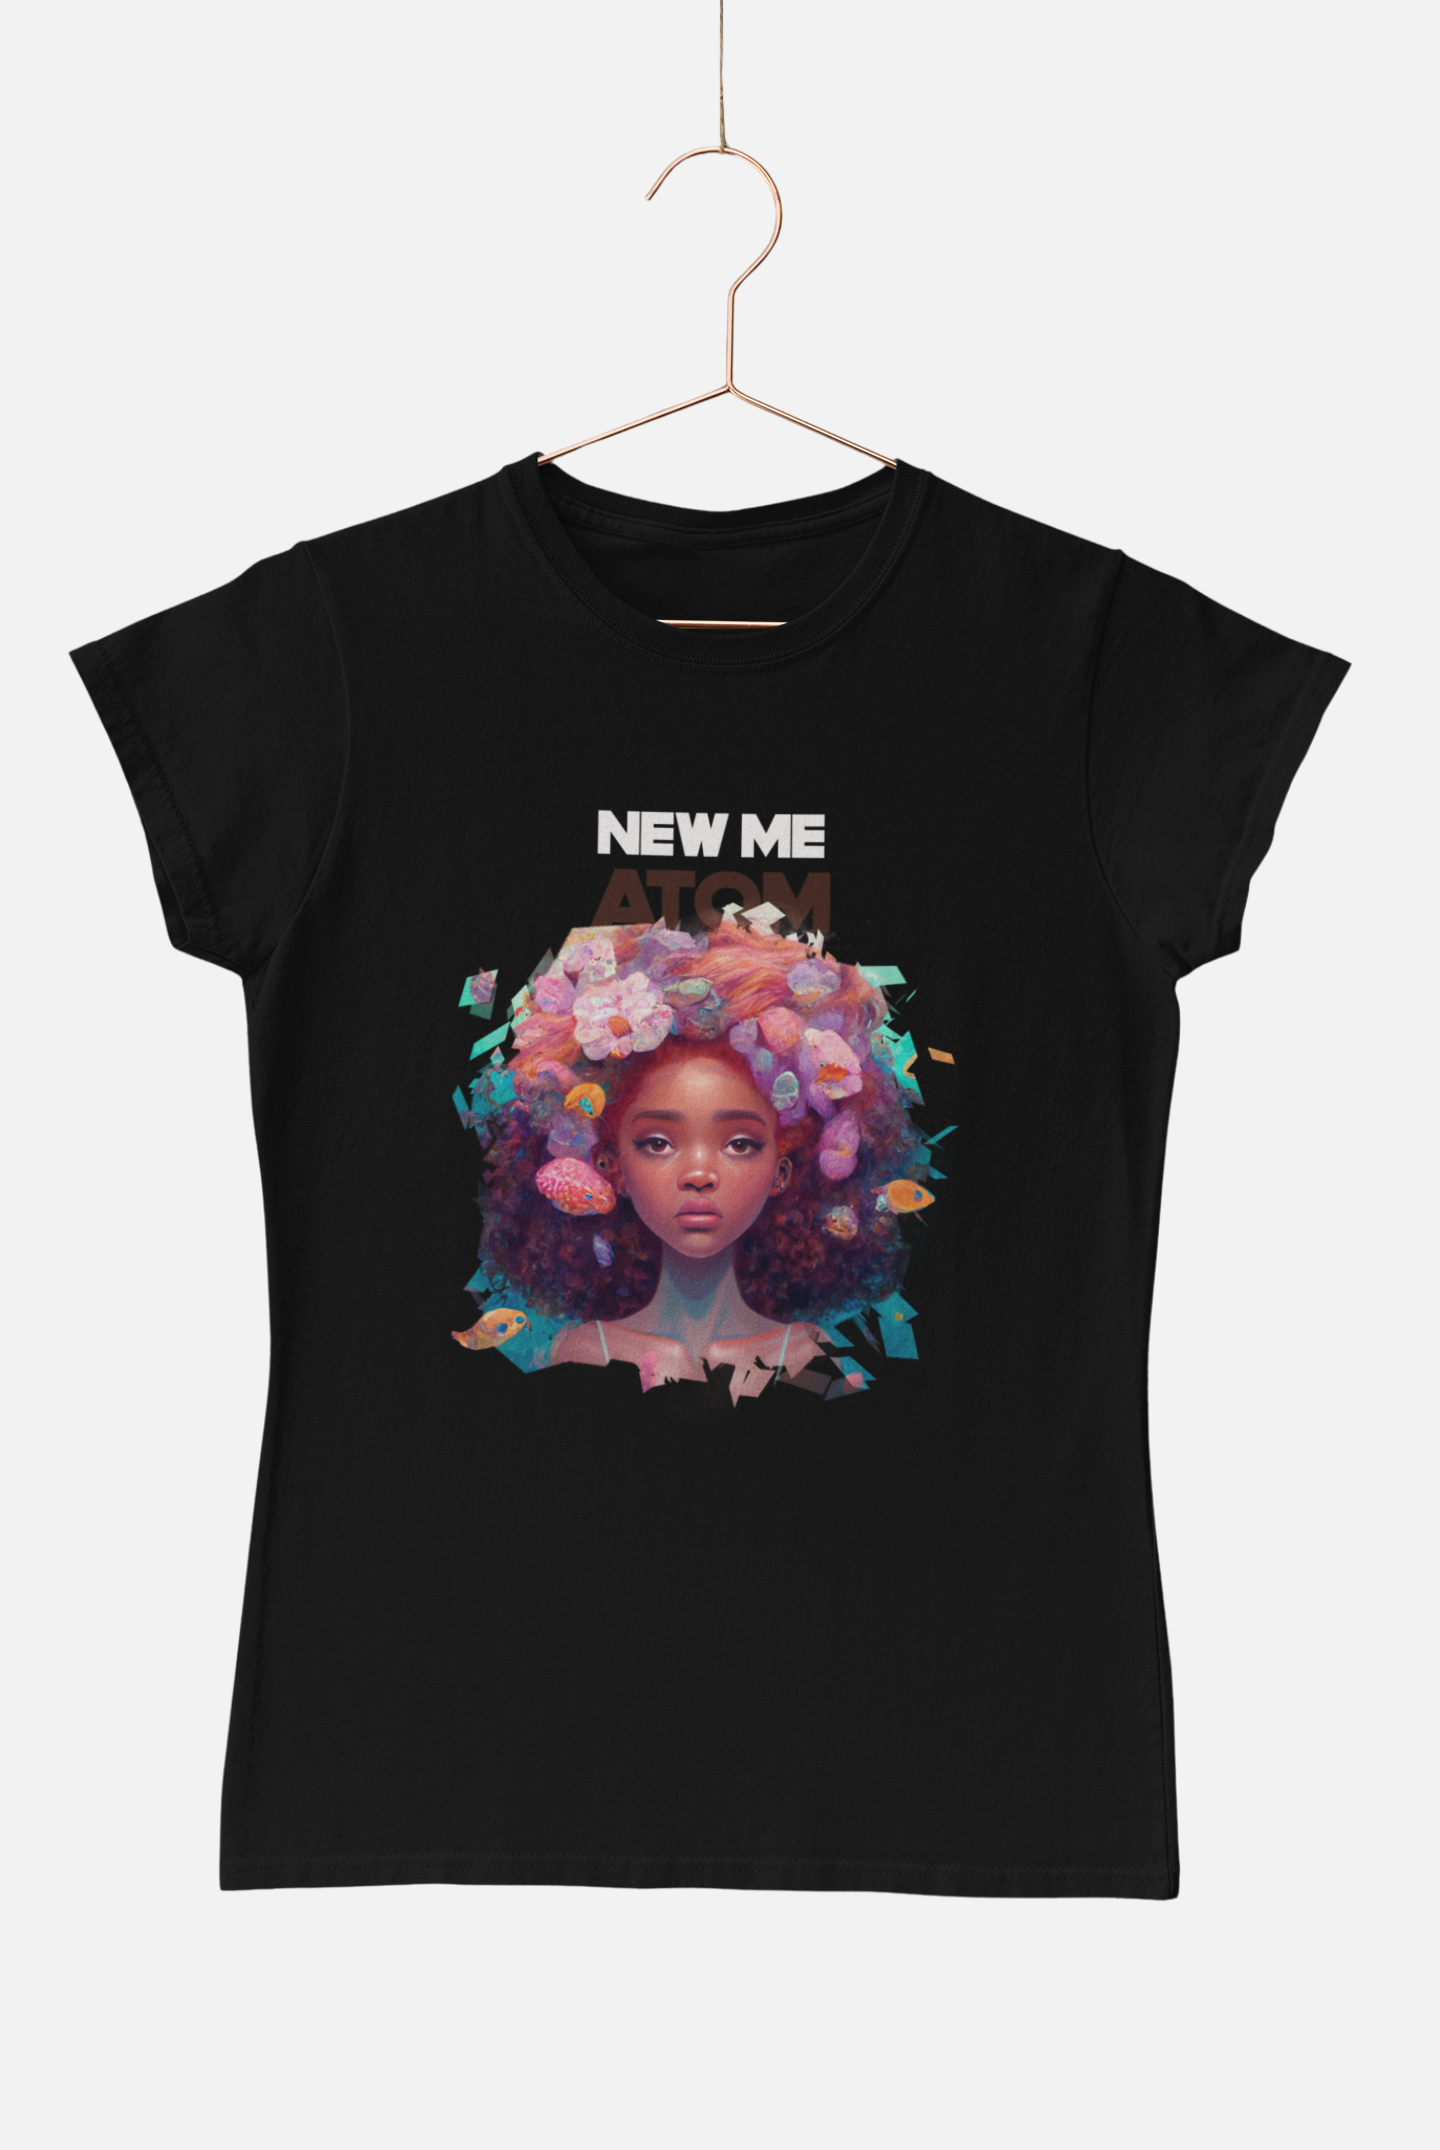 New Me Black Round Neck T-Shirt for Women. 